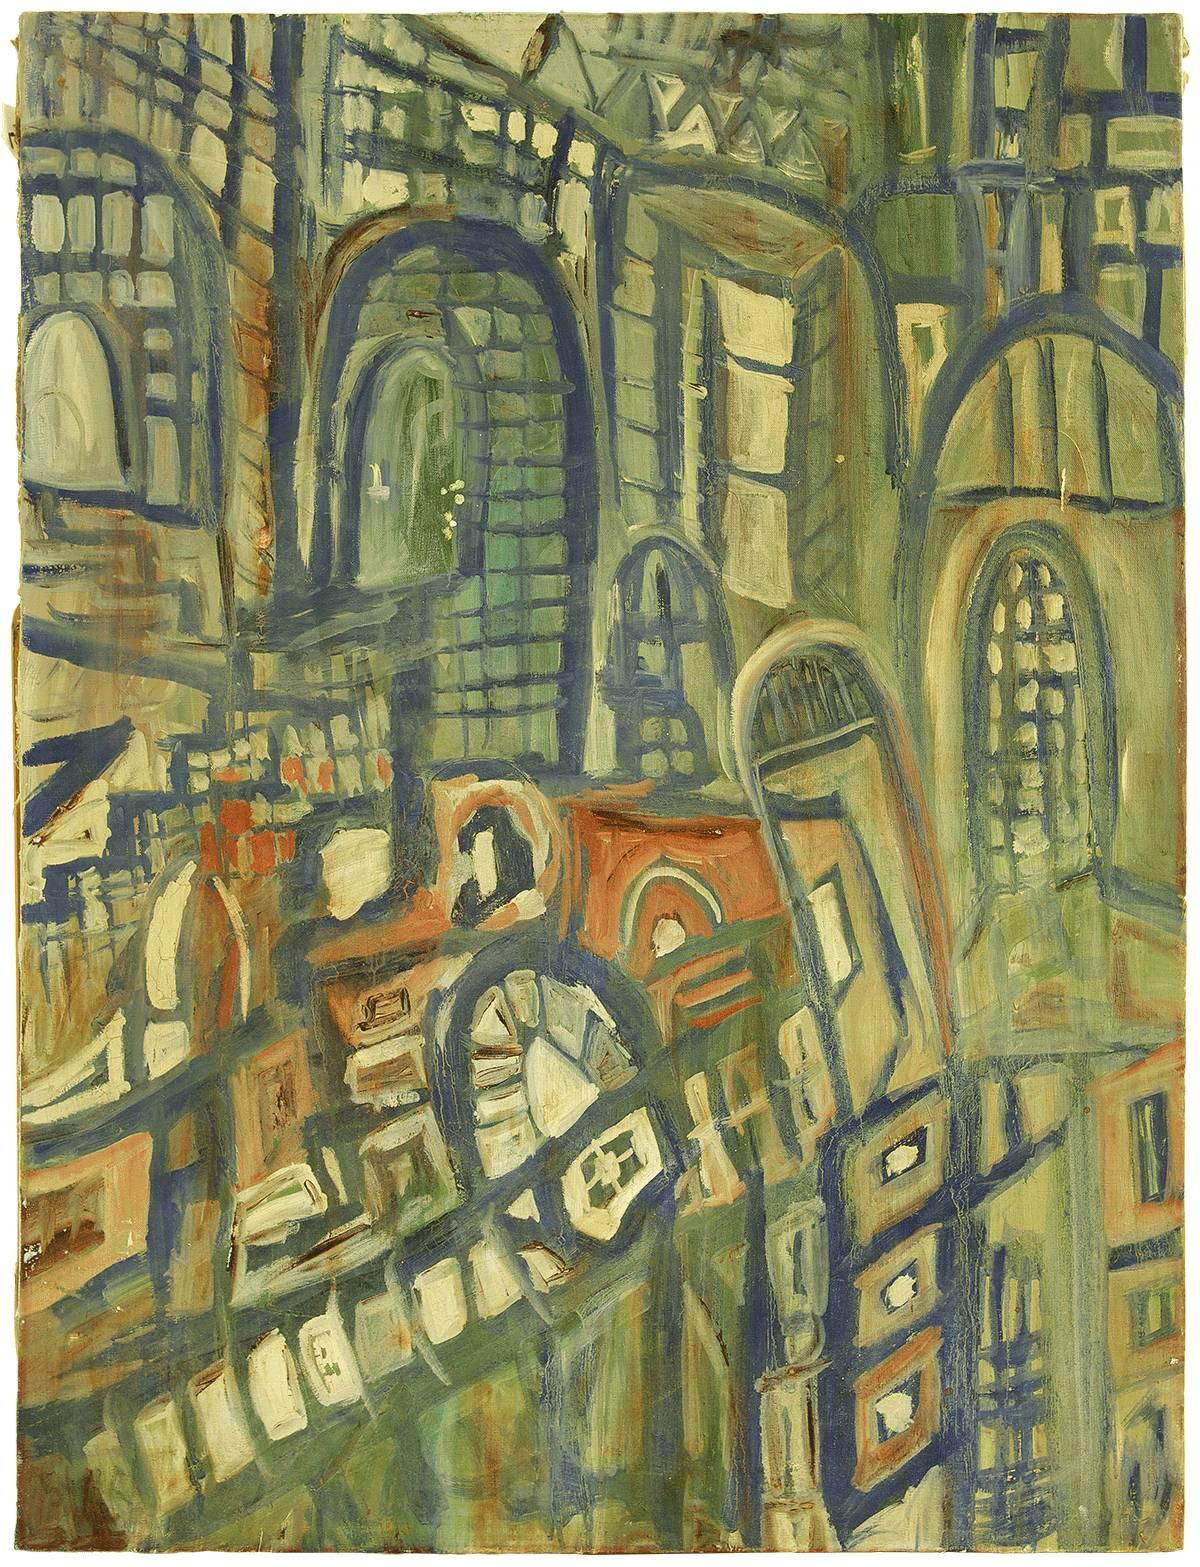 Unknown Figurative Art - Abstract Expressionist Streets of Jerusalem Israeli Painting 1950